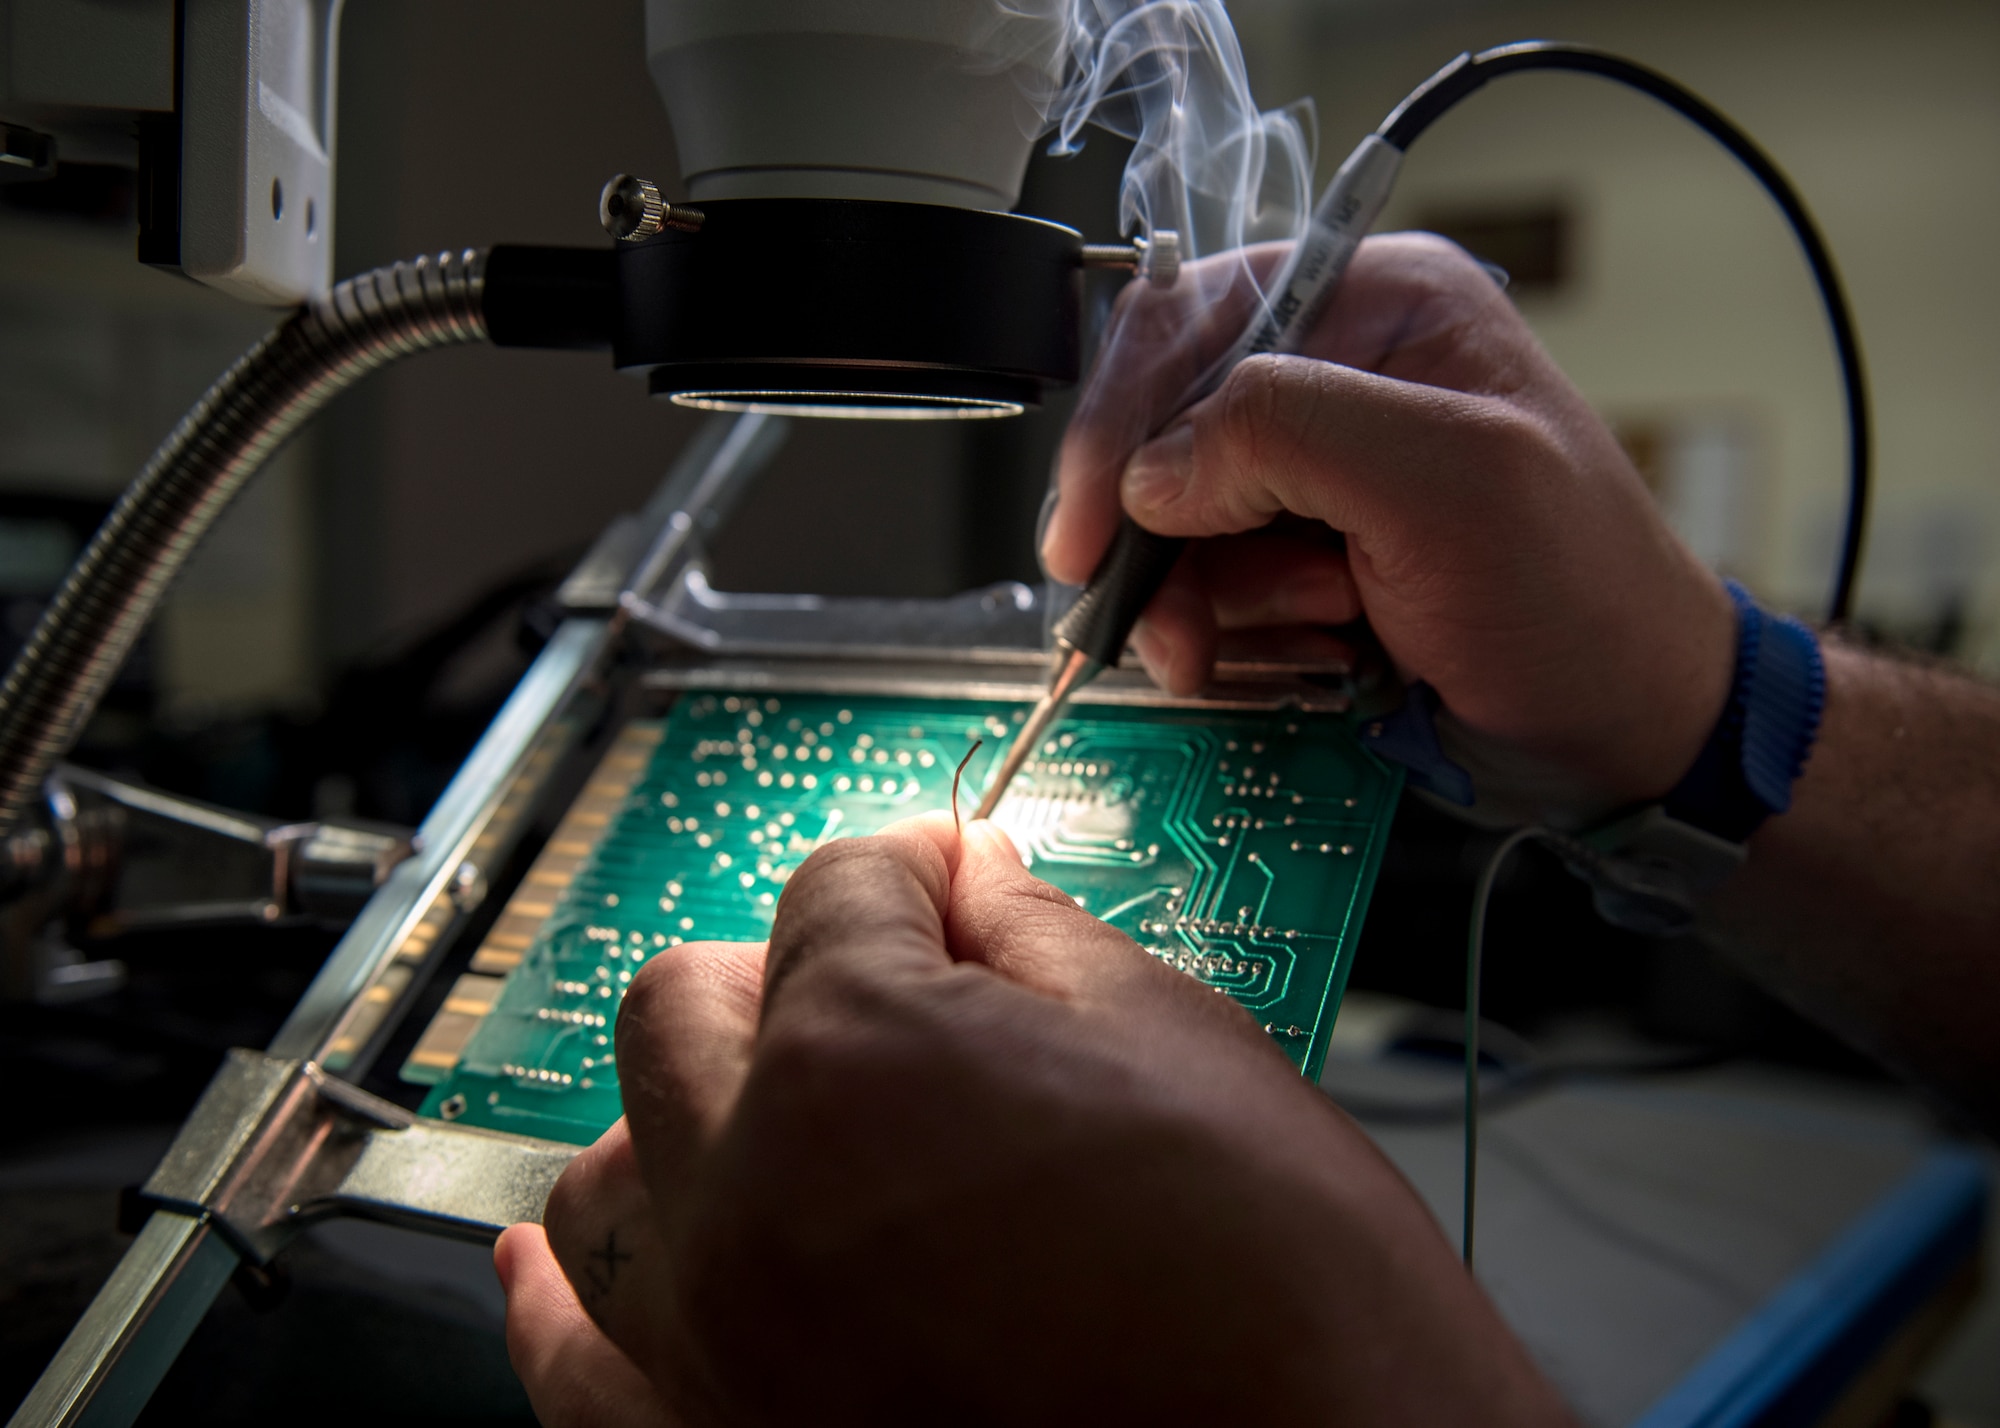 U.S. Air Force Tech. Sgt. Jeremy Blackwell, 92nd Maintenance Group Air Force Repair Enhancement Program non-commissioned officer in charge, solders a circuit board at Fairchild Air Force Base, Washington, March 20, 2019. The 92nd Maintenance Group Air Force Repair Enhancement Program is ran by Airmen who take pride in contributing to the ‘Green in 19’ initiative by restoring what would-be waste into money-saving treasure. (U.S. Air Force photo by Airman 1st Class Whitney Laine)